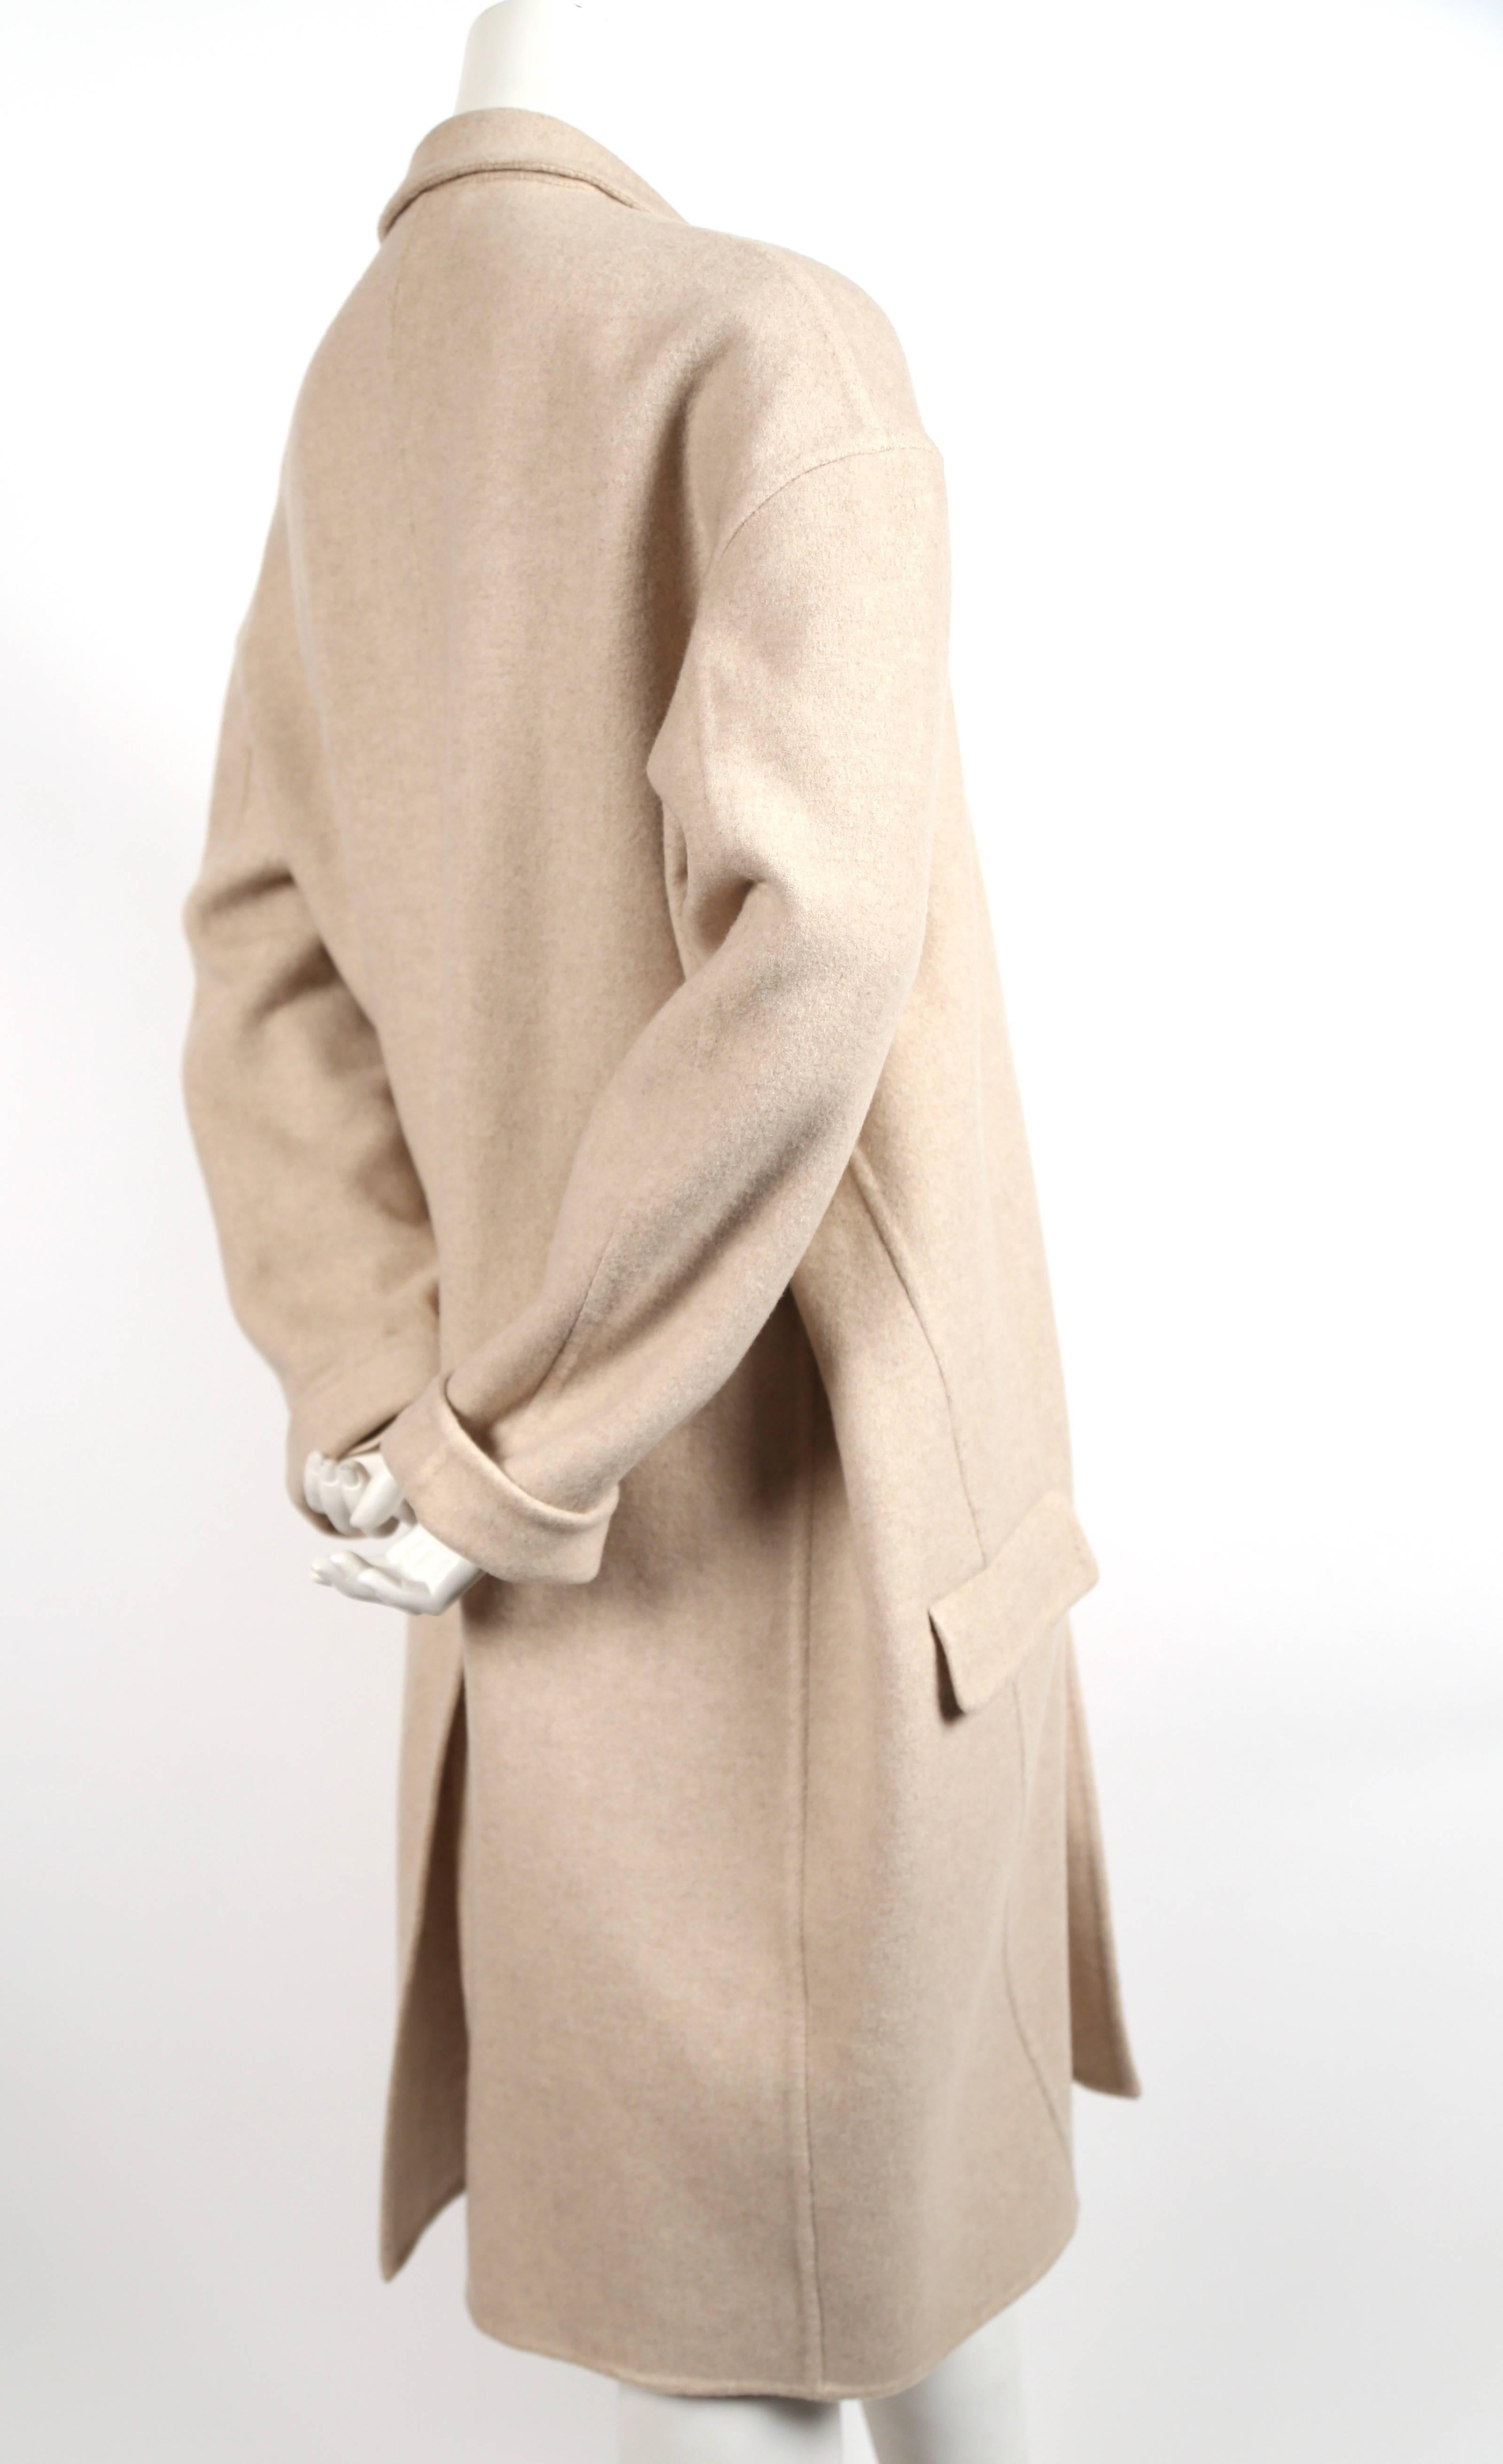 Very soft, heathered-oatmeal colored cashmere coat in an 'egg shape' designed by Phoebe Philo for Celine. French size 40. Approximate measurements: drop shoulder 22